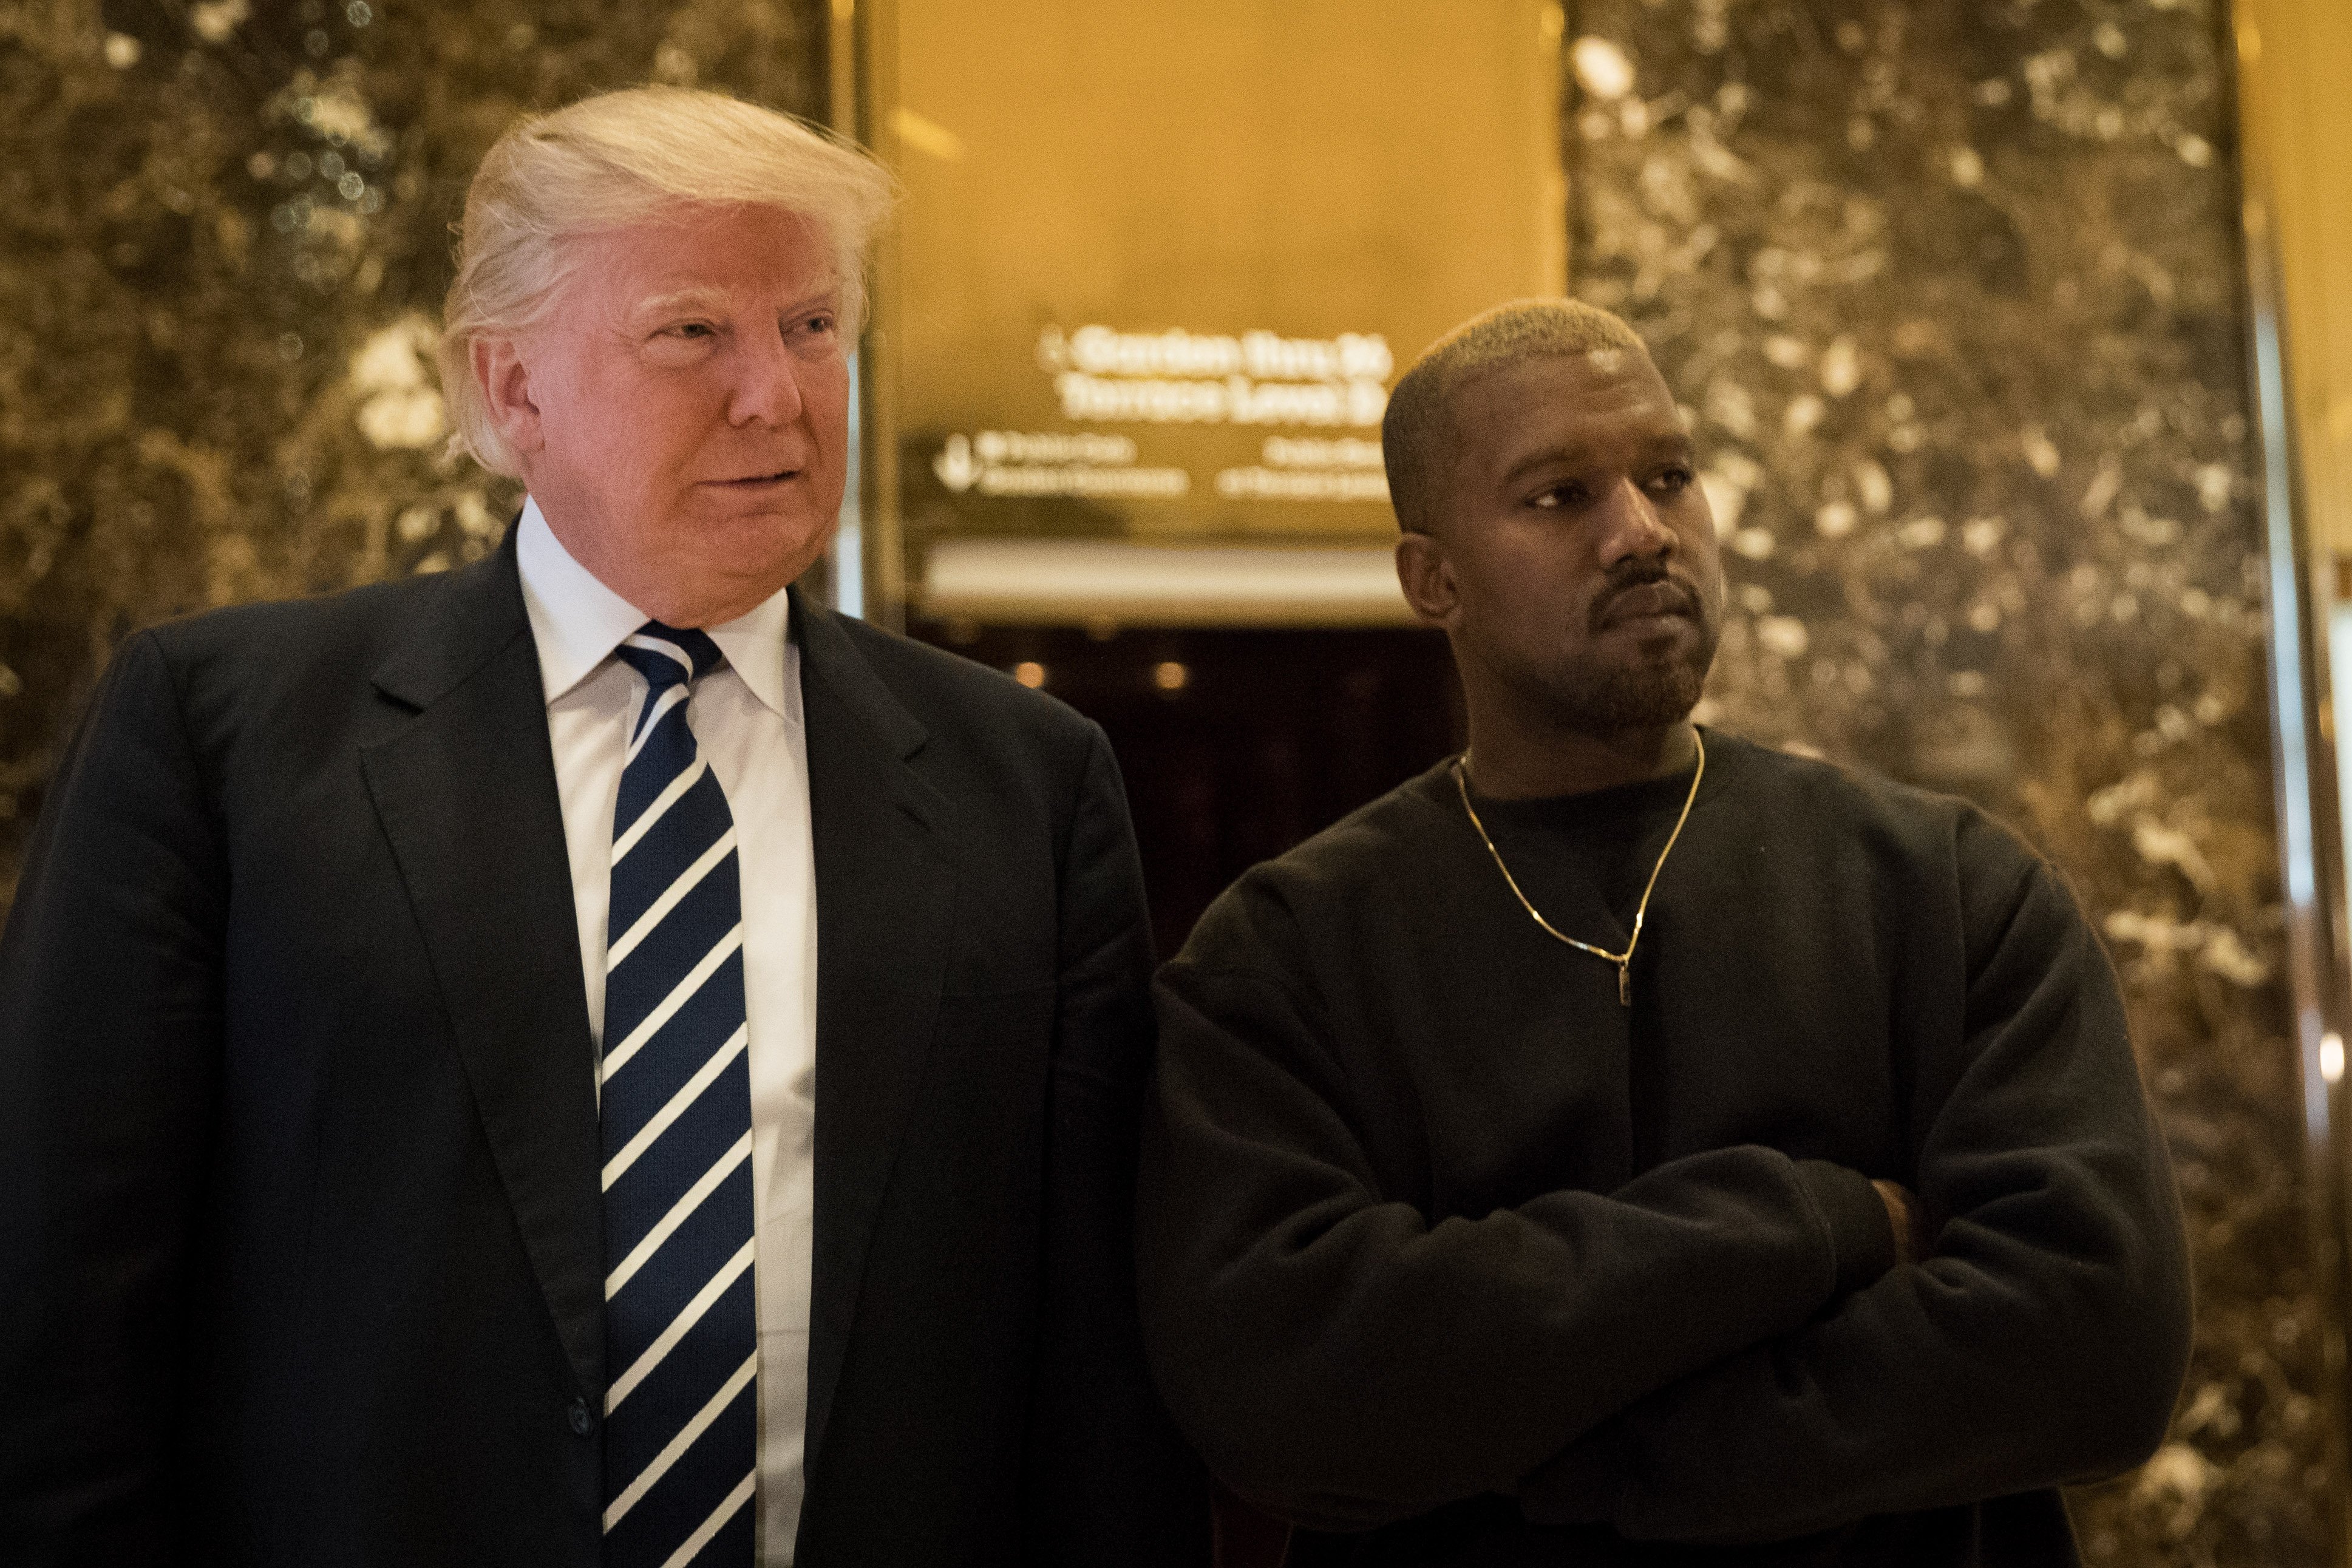 President-elect Donald Trump and Kanye West stand together in the lobby at Trump Tower, December 13, 2016 in New York City.